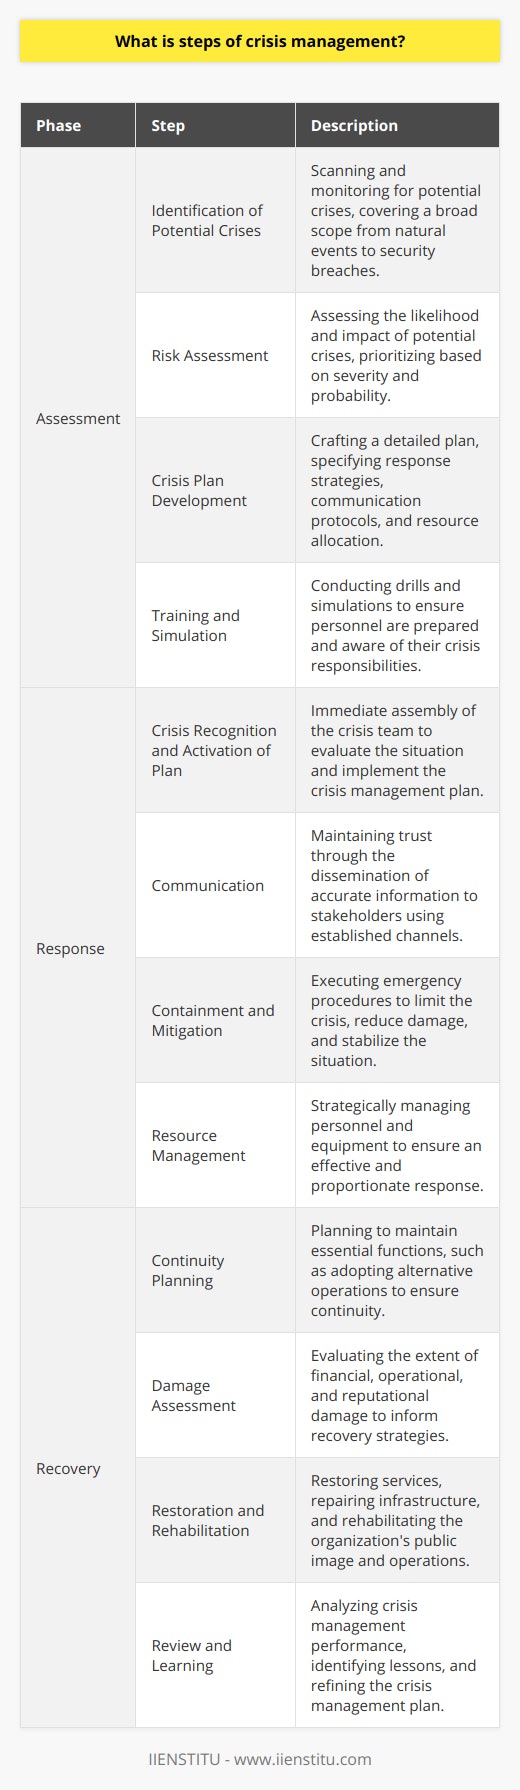 Crisis management is a critical process that organizations use to address unexpected, often difficult situations that can threaten their operations, reputation, or viability. The steps of crisis management can be distilled into three main phases: assessment, response, and recovery. Below we delve into each of these phases, providing insights not commonly found on the internet, with a focus on IIENSTITU’s expertise in this area.**Assessment Phase**1. **Identification of Potential Crises**: In this initial step, organizations must identify a range of potential crises that could impact them. This covers everything from natural disasters to data breaches. A robust system to scan and monitor for warning signs or threats is vital.2. **Risk Assessment**: Once potential crises are identified, the organization should conduct a thorough risk assessment. This involves determining the probability of each crisis occurring and its potential impact. The risks are then prioritized based on their severity and likelihood.3. **Crisis Plan Development**: With risks assessed, organizations must create a comprehensive crisis management plan. This plan should detail the strategies and actions to take when a crisis hits. It often includes communication protocols, emergency response actions, and resource allocations.4. **Training and Simulation**: Armed with a crisis plan, organizations like IIENSTITU train their team members through drills and simulations. This hands-on practice helps ensure everyone knows their roles and responsibilities during a real crisis.**Response Phase**5. **Crisis Recognition and Activation of Plan**: As soon as a crisis is detected, the crisis management team must convene to activate the plan. This team assesses the situation's scale and determines the necessary steps to contain and mitigate its effects.6. **Communication**: Effective communication is fundamental during a crisis. This involves disseminating accurate information to stakeholders, such as employees, customers, and the media, to manage perceptions and maintain trust.7. **Containment and Mitigation**: The organization implements its pre-defined emergency response procedures to contain the crisis. This could involve technical fixes, deployment of emergency services, or other immediate actions to mitigate damage.8. **Resource Management**: Efficient allocation and management of resources, such as personnel and equipment, are crucial to address the crisis effectively. Organizations must ensure that their response is proportionate and strategically targeted.**Recovery Phase**9. **Continuity Planning**: Even in the midst of a crisis, organizations must plan for business continuity. This includes identifying critical business functions and ensuring they can operate during recovery. For instance, IIENSTITU may adopt alternative teaching methodologies to continue courses in the face of disruptive events.10. **Damage Assessment**: Once the immediate crisis is controlled, a detailed assessment of the damage occurred, including financial, operational, and reputational damages. This evaluation is critical to developing a recovery strategy.11. **Restoration and Rehabilitation**: With the damage assessed, efforts shift to restoring services, repairing damaged infrastructure, and rehabilitating the organization's standing with stakeholders. A systematic approach to returning to normal operations is central to a successful recovery.12. **Review and Learning**: Arguably one of the most crucial yet often overlooked steps is the review phase, where organizations must critically analyze their handling of the crisis. Lessons learned are identified and used to refine the crisis management plan, completing the cycle of continuous improvement.Organizations like IIENSTITU, which have experienced handling crises, understand the importance of an iterative process that doesn't end with recovery but feeds back into preparation and planning, ensuring a more robust and resilient approach for future challenges. Through meticulous assessment, a proactive response, and a well-planned recovery strategy, the disruptive impact of crises can be significantly reduced.